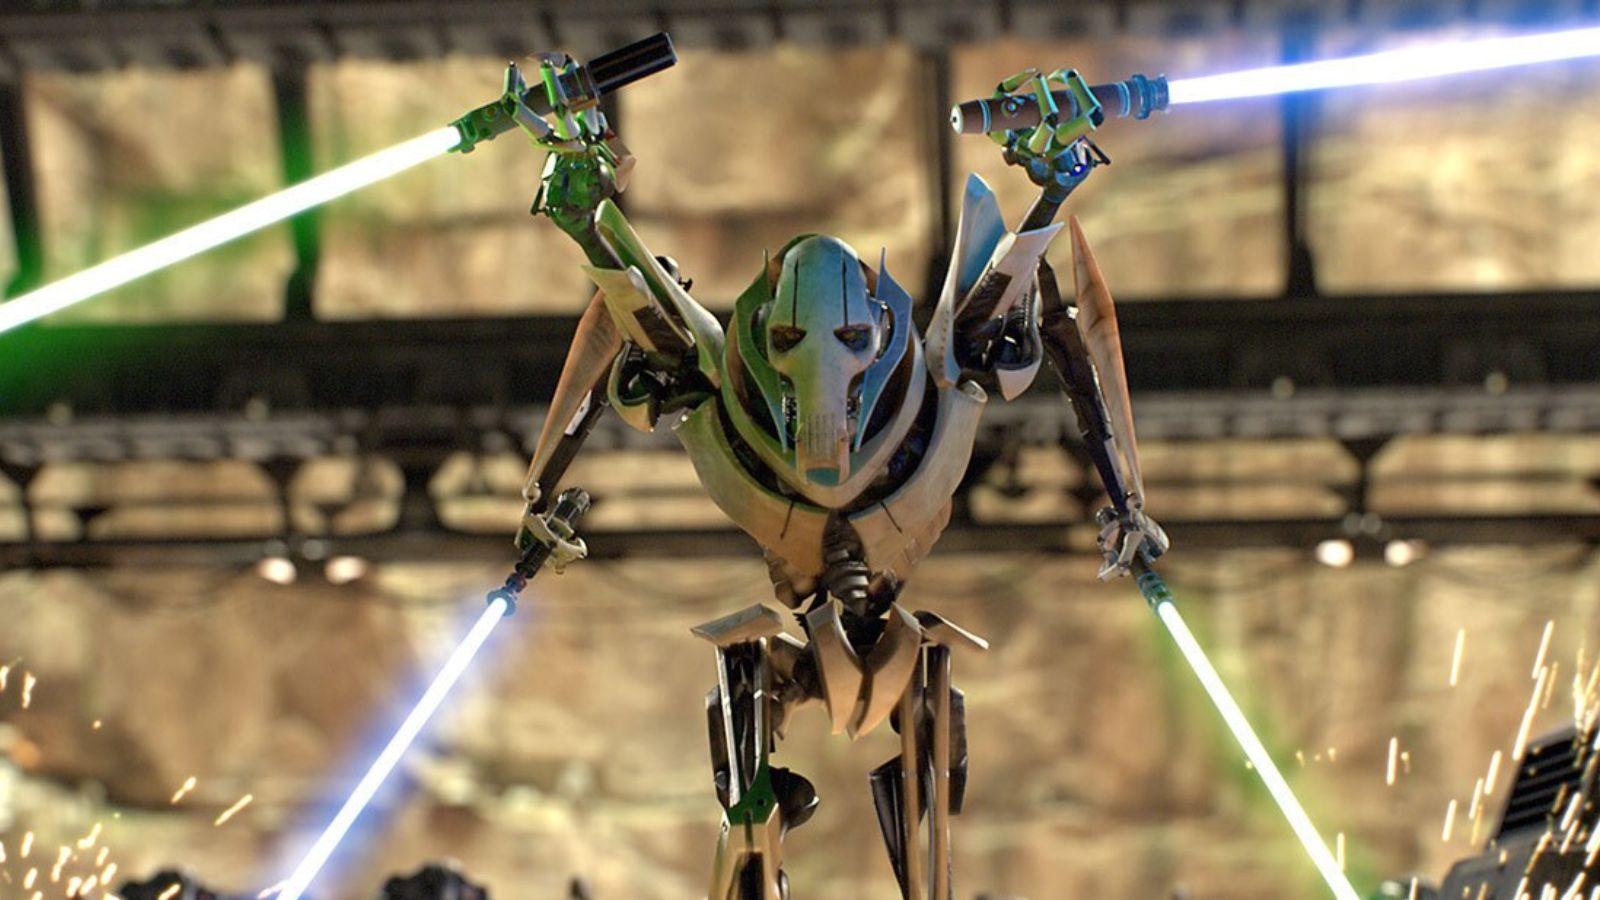 General Grevious in Revenge of the Sith